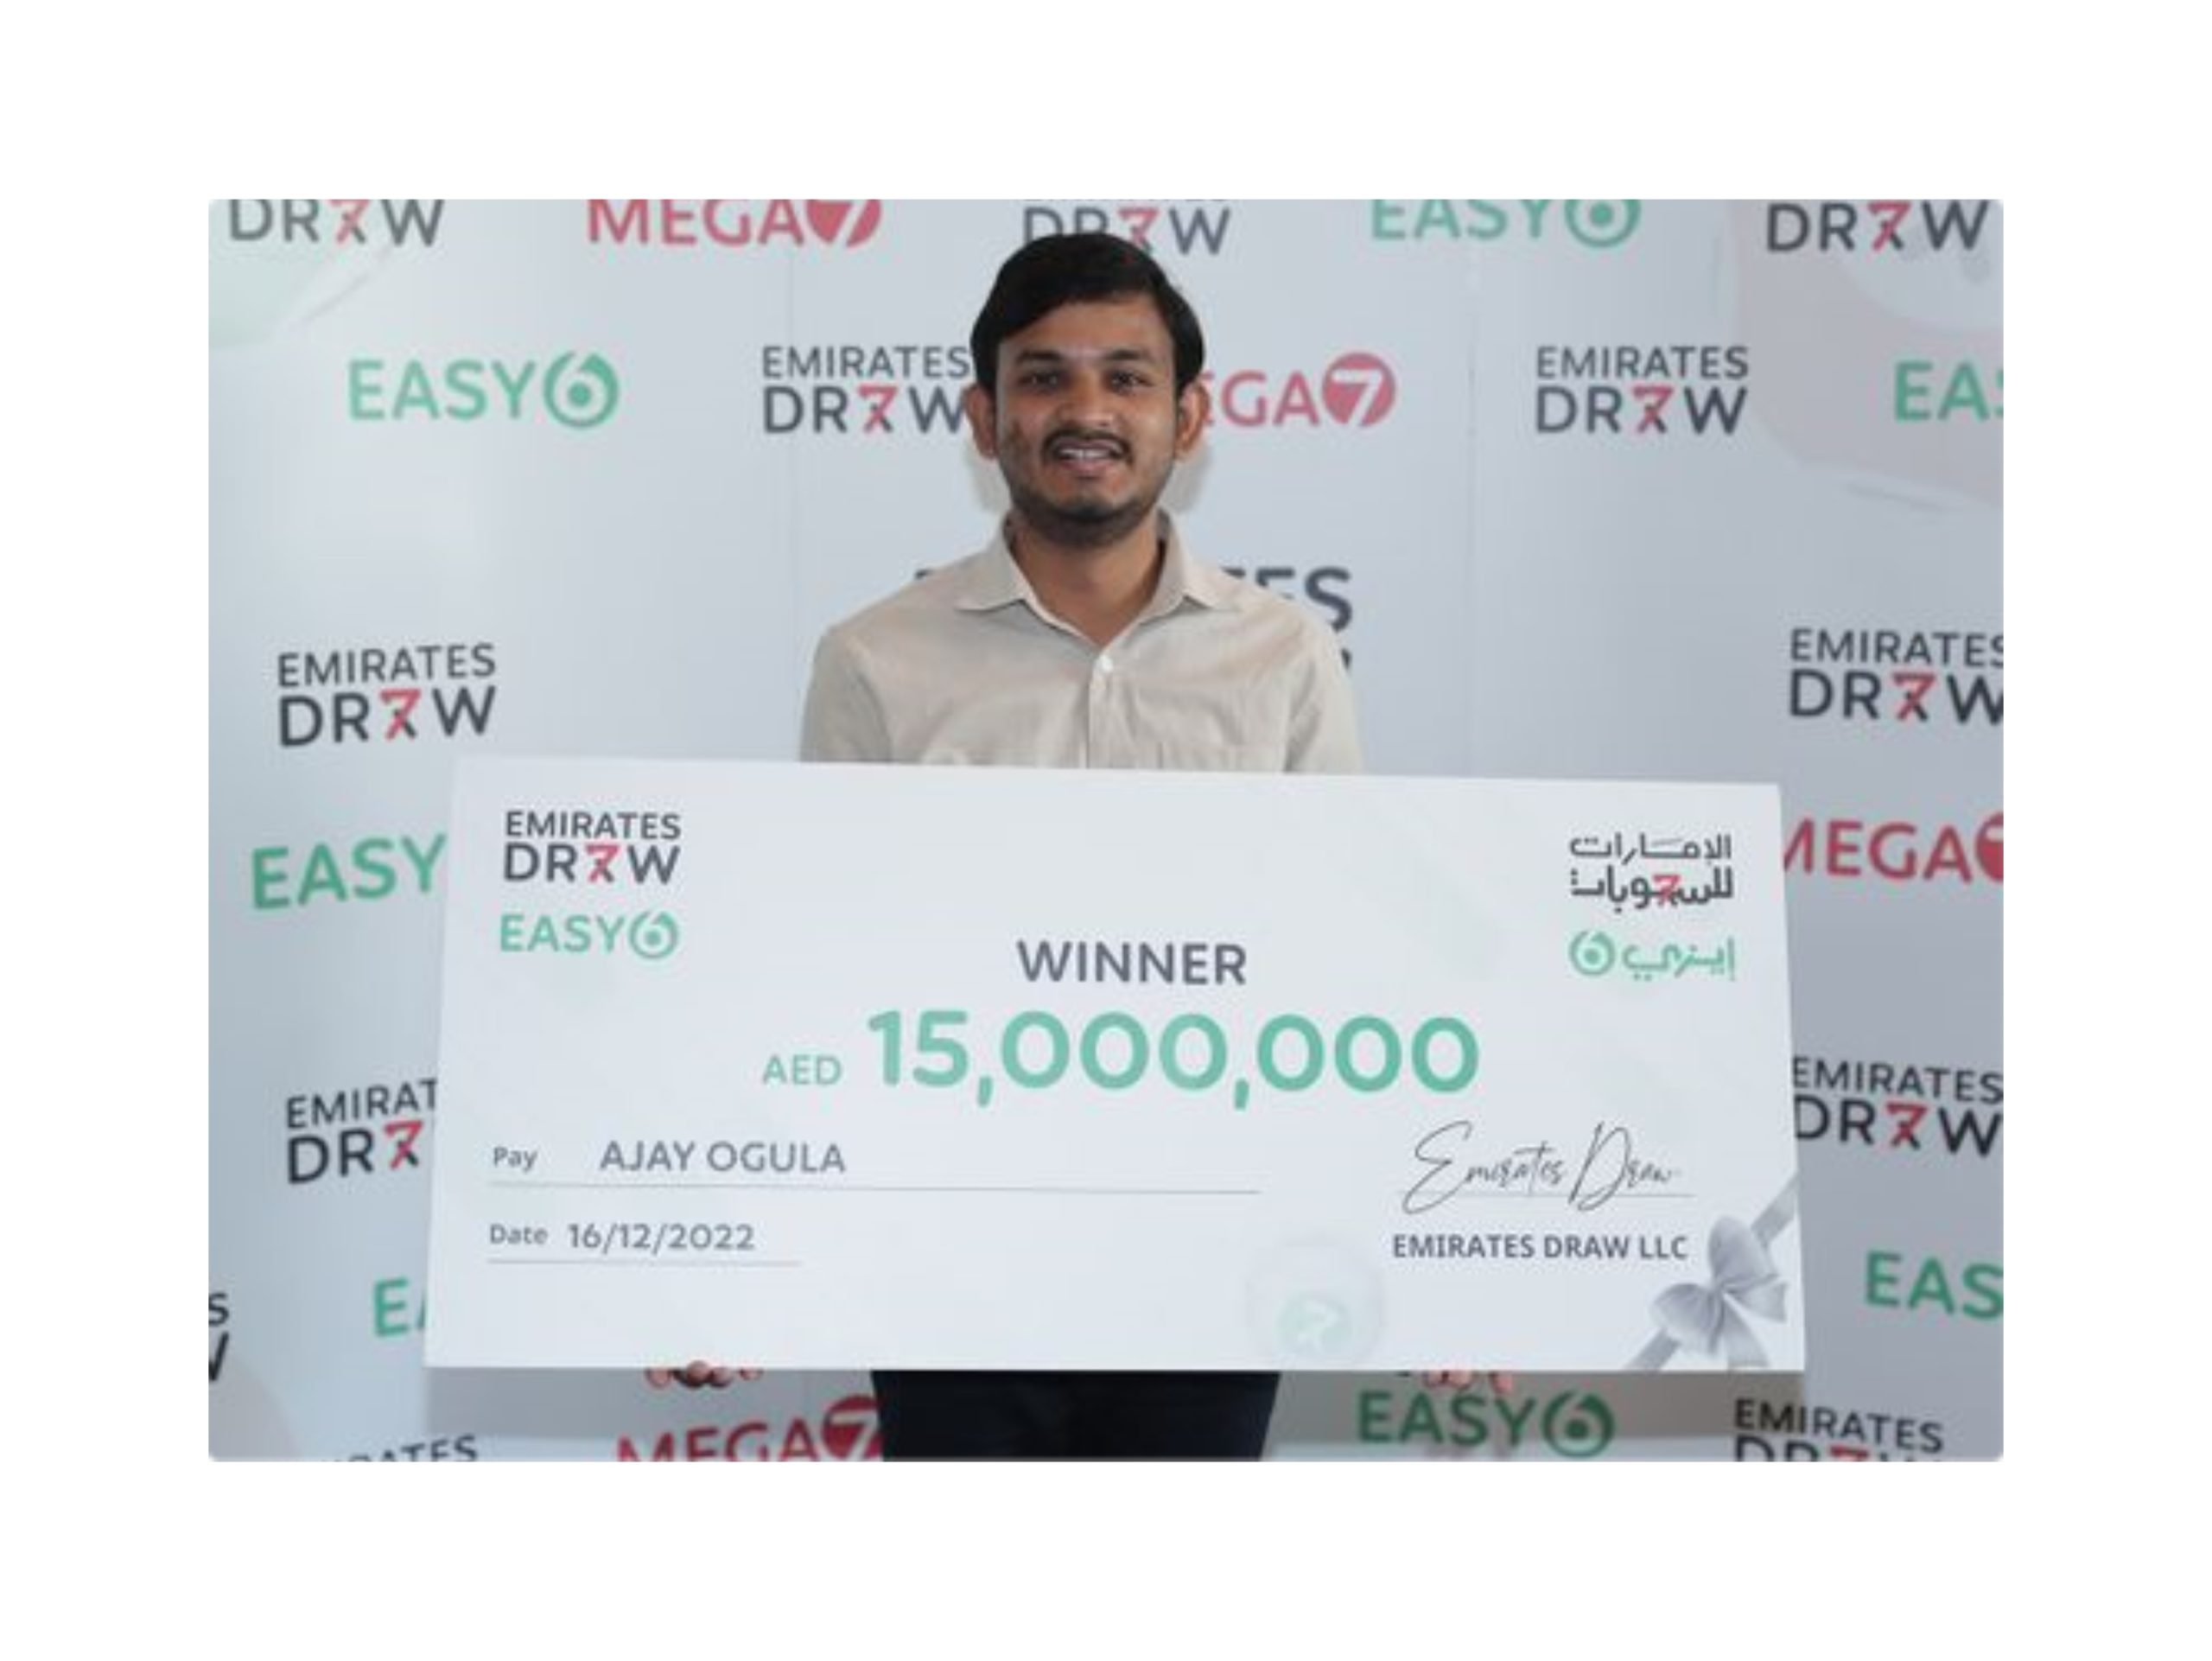 Dubai Indian driver wins Rs 33 crore lottery prize in Emirates Draw